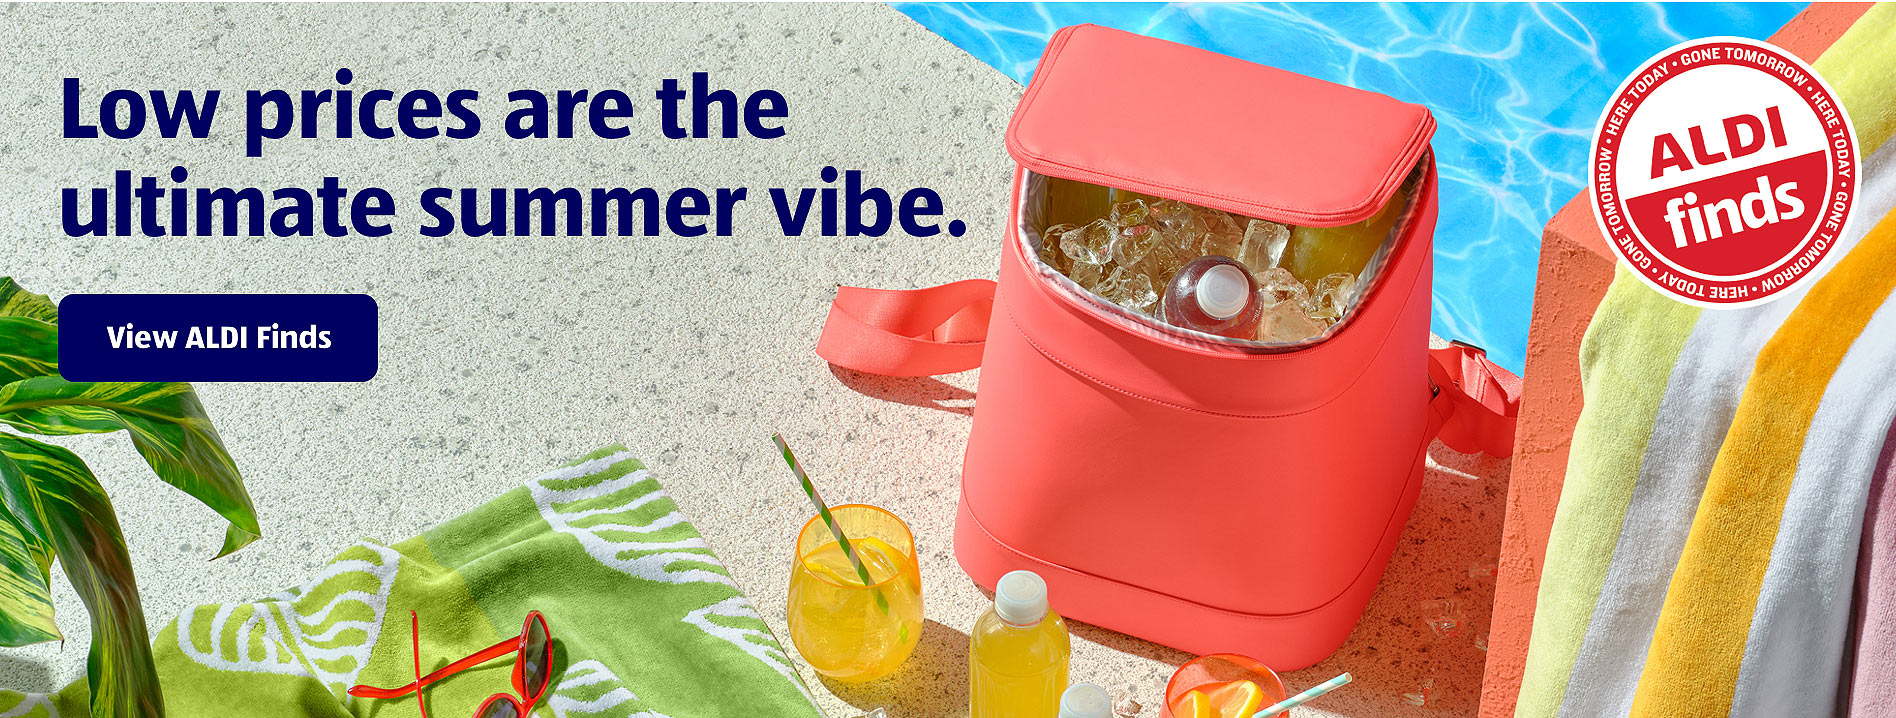 Low prices are the ultimate summer vibe. View ALDI Finds.